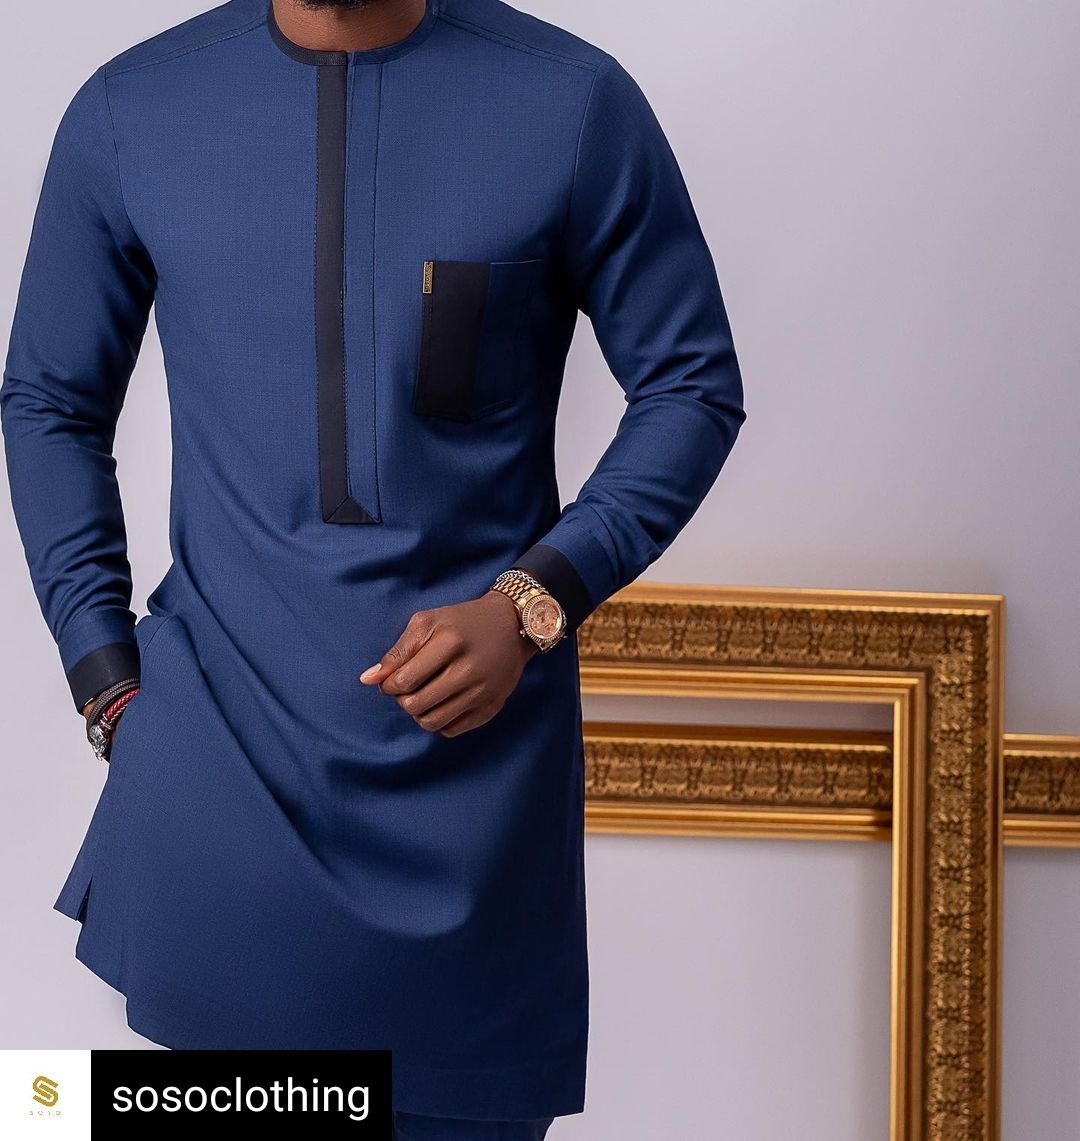 Clean andFresh @sosoclothing Get inspiration for any occasion on the #AfriqOkin app, free on Google play and Apple app store. 👉🏾 onelink.to/aptvqj #AfricanFashionApp #AfricanFashion #AfricanPrint #sosoclothing #sosokaftans #mensfashion